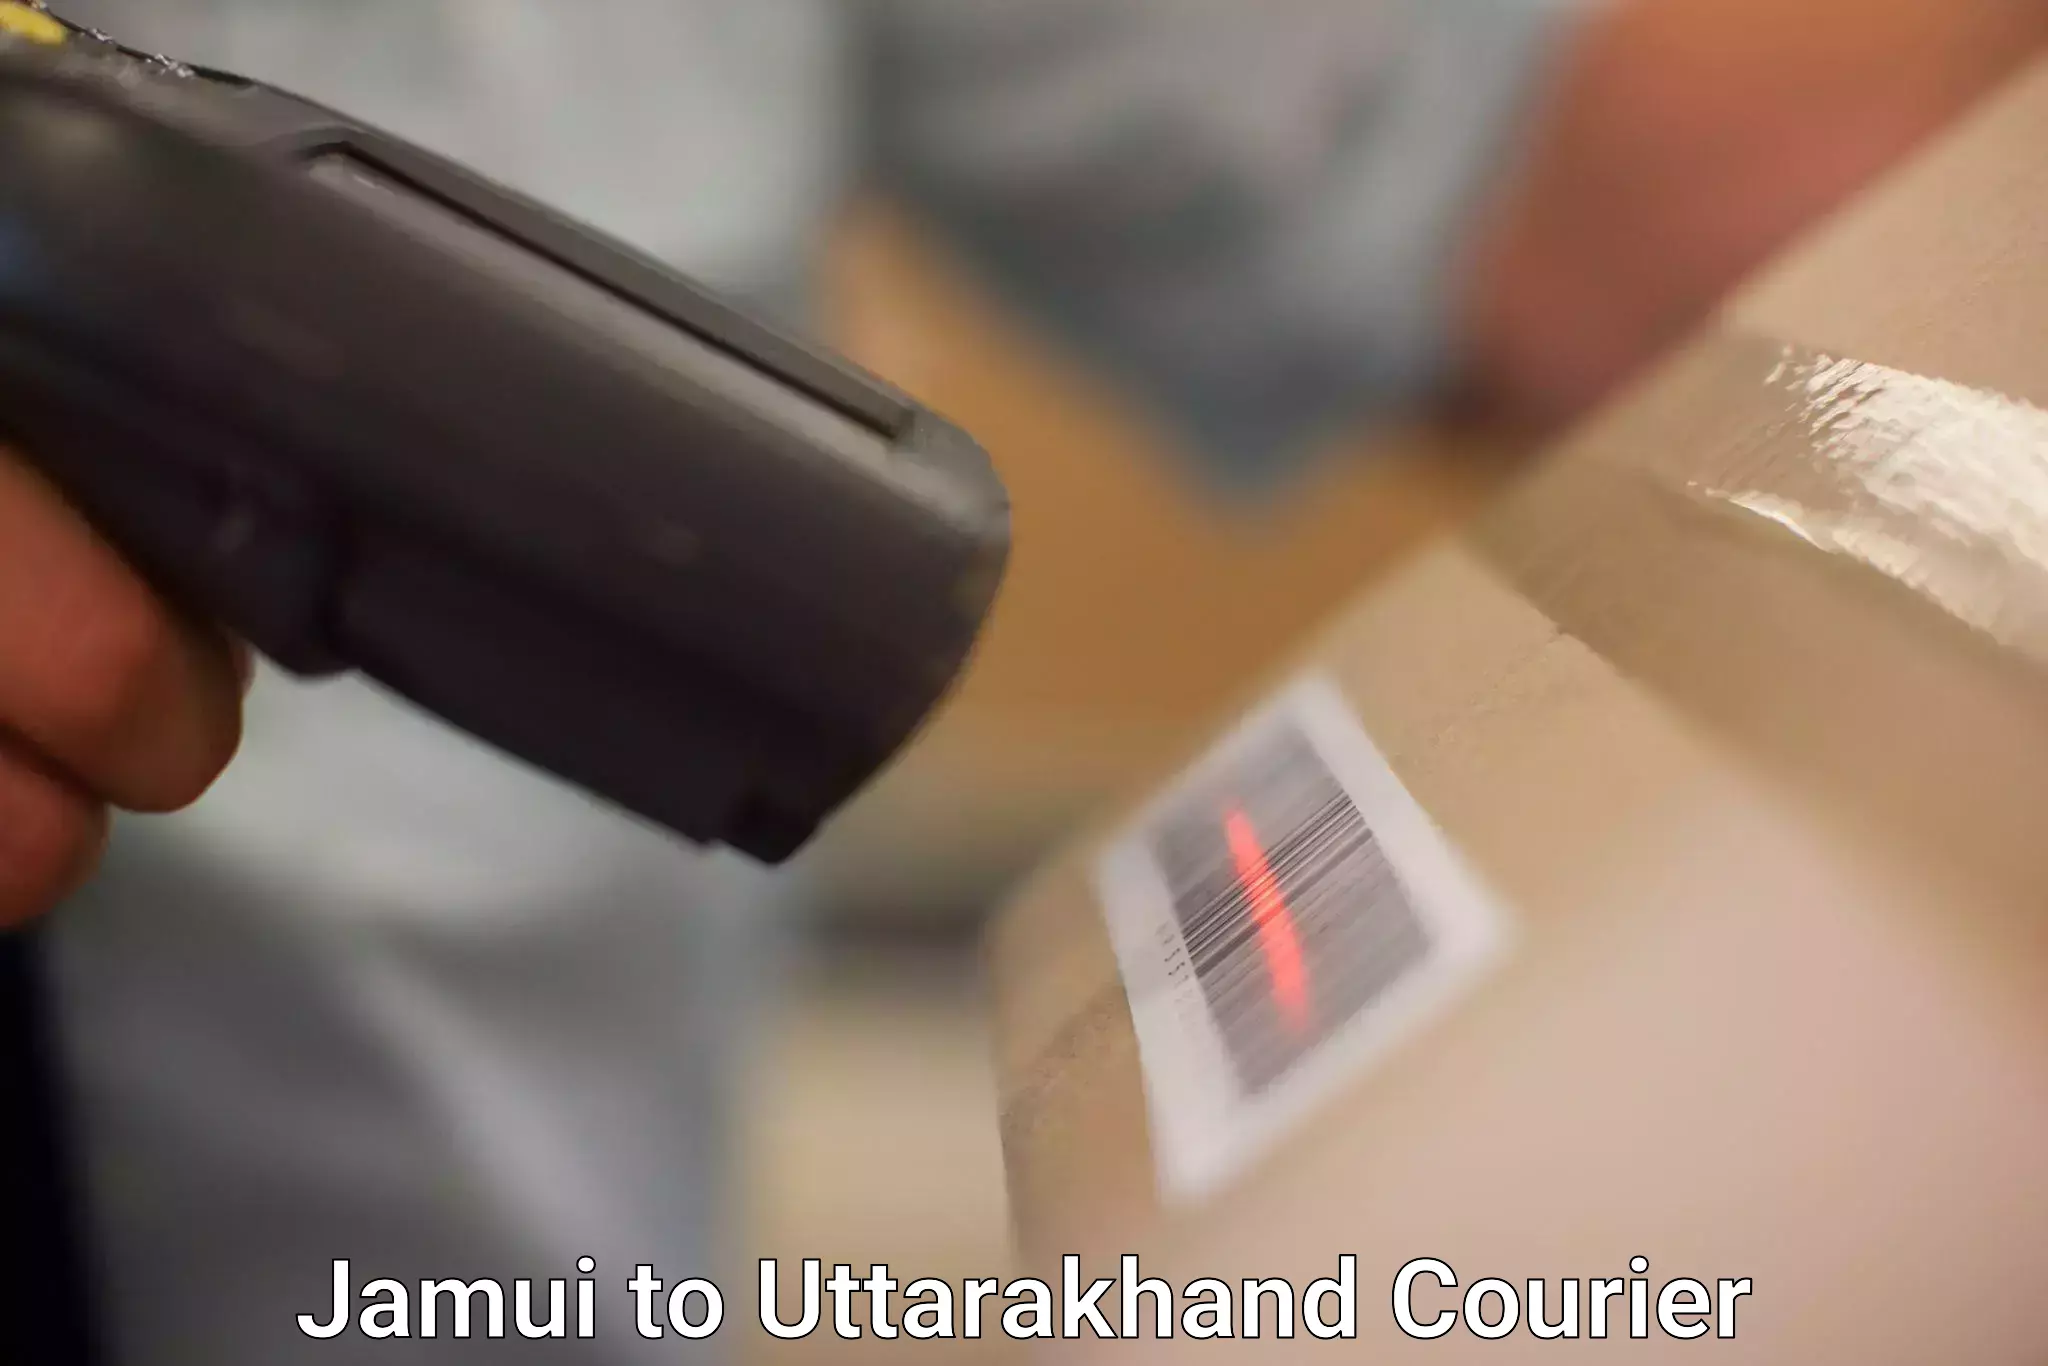 State-of-the-art courier technology Jamui to Haridwar